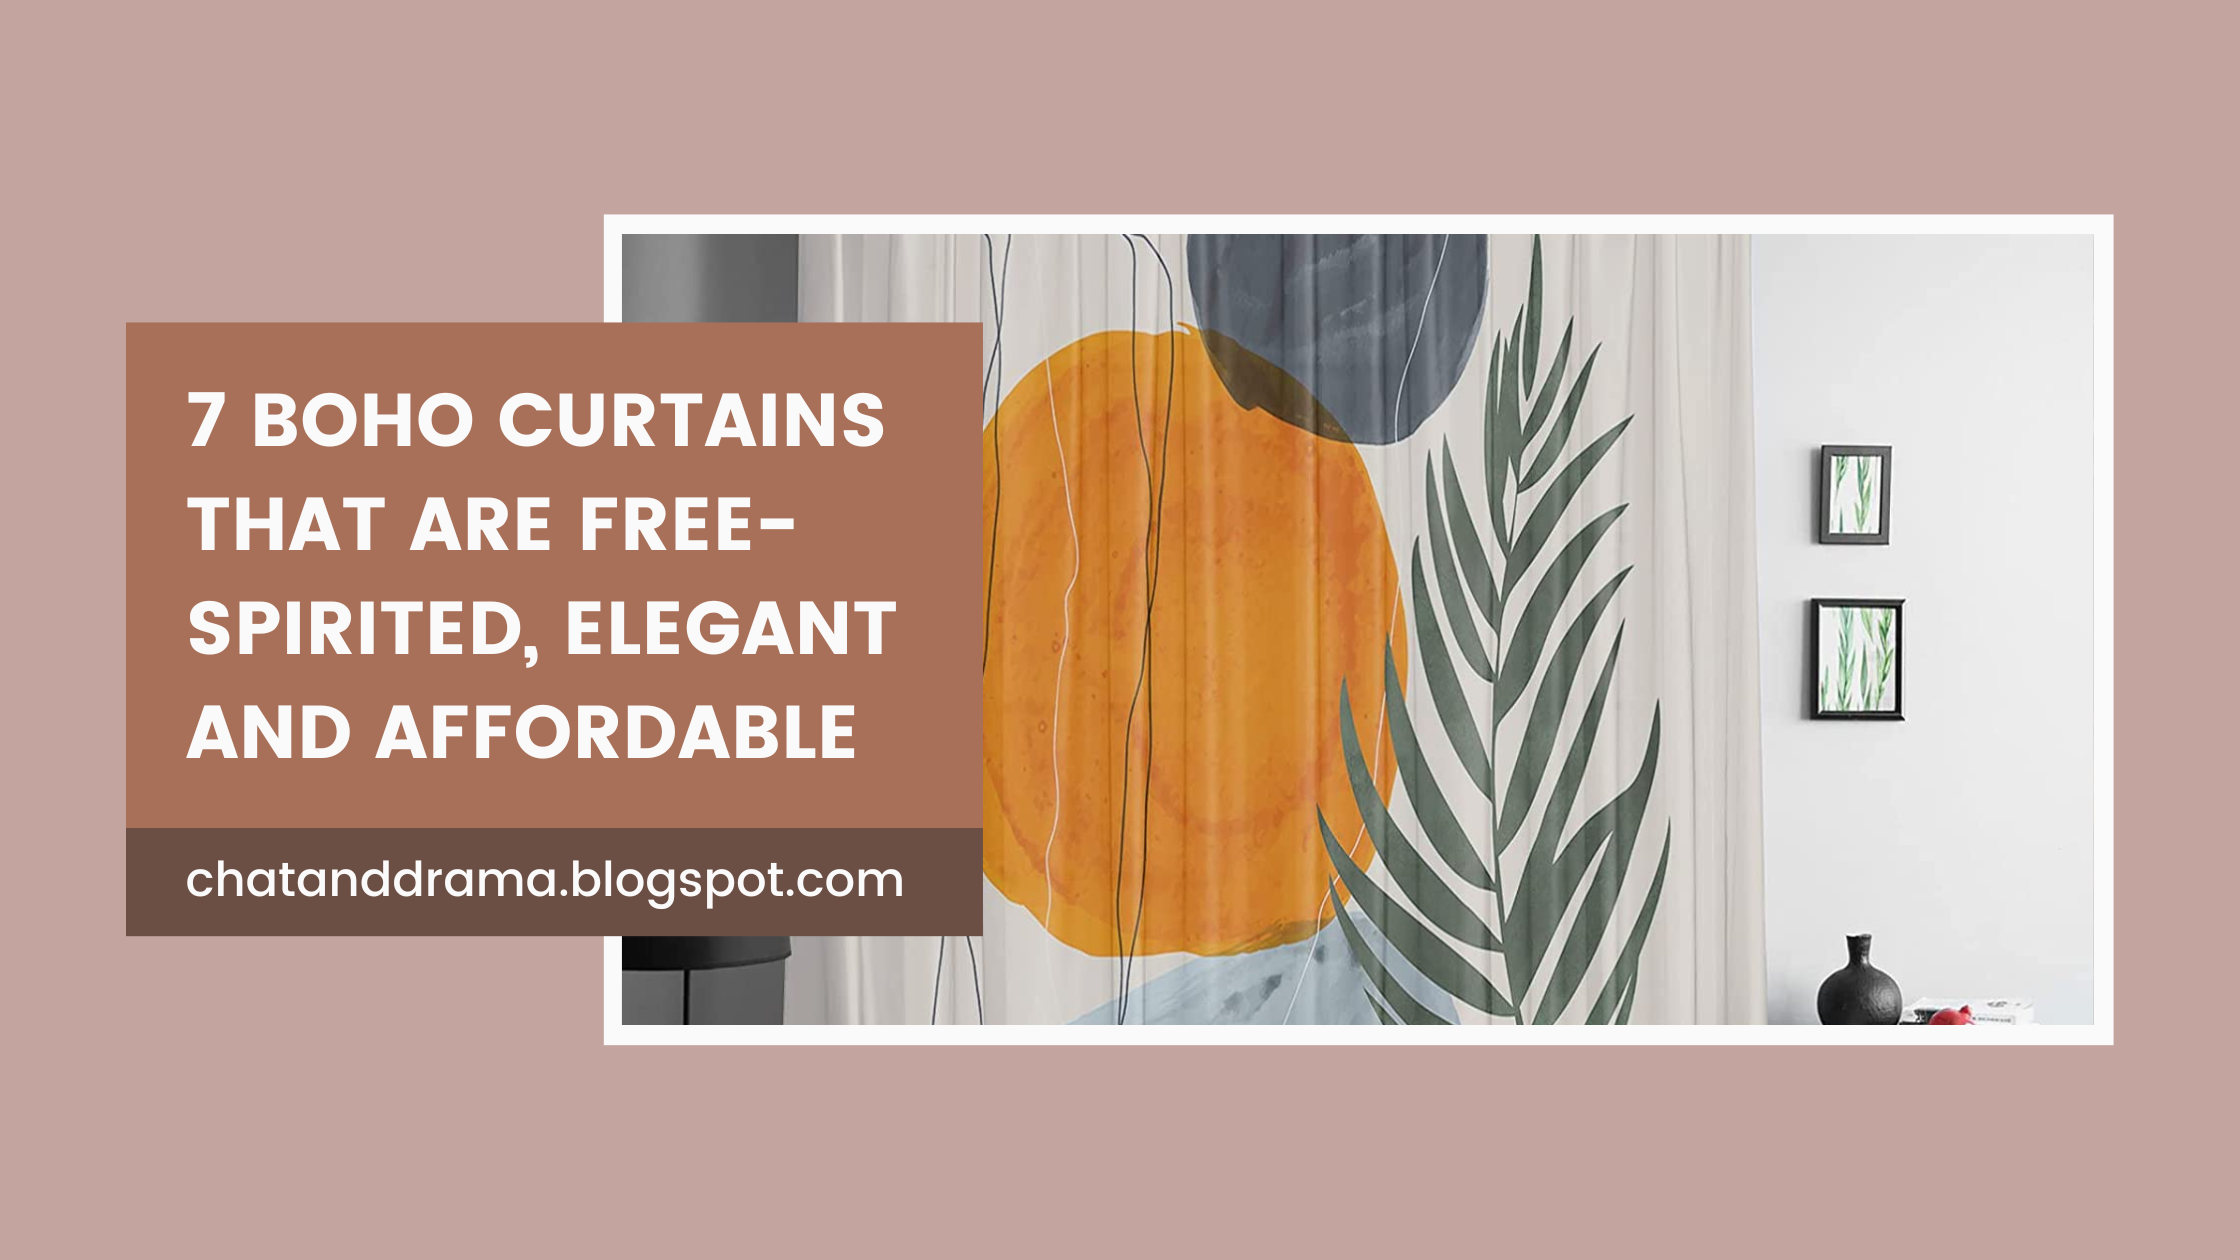 Add More Beauty to Your Home with Boho Curtains